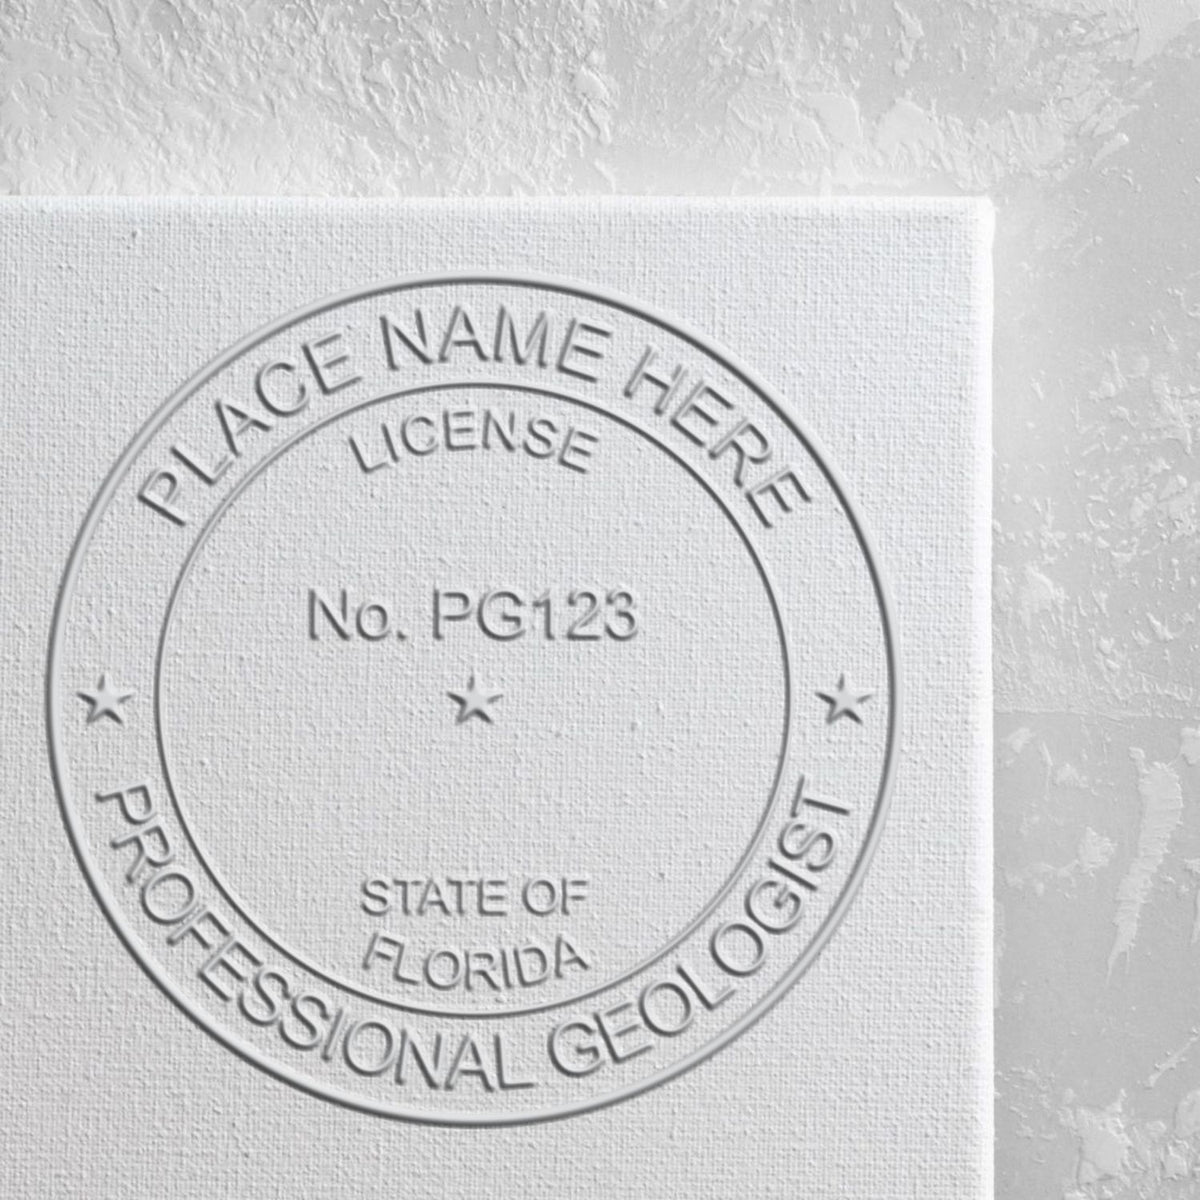 An alternative view of the Soft Florida Professional Geologist Seal stamped on a sheet of paper showing the image in use